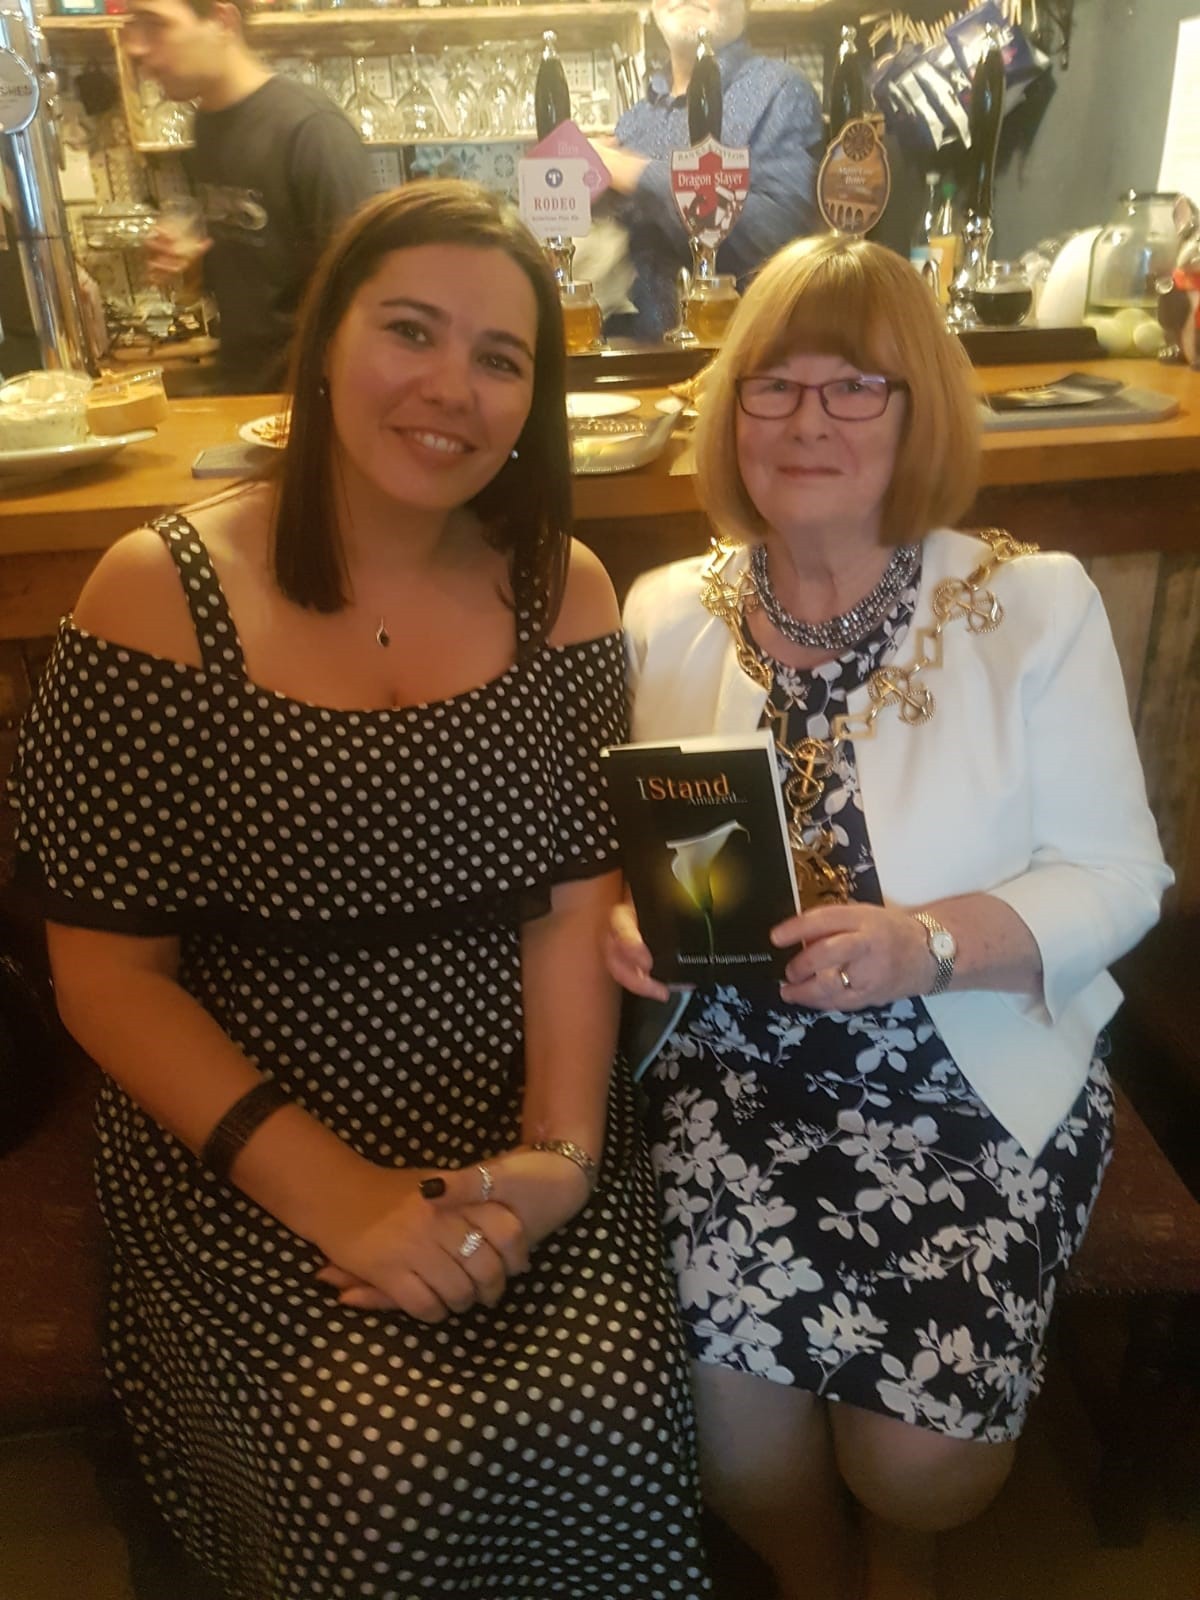 Author Antonia Chapman Enjoys the Success of Her Book Launch in Stockton